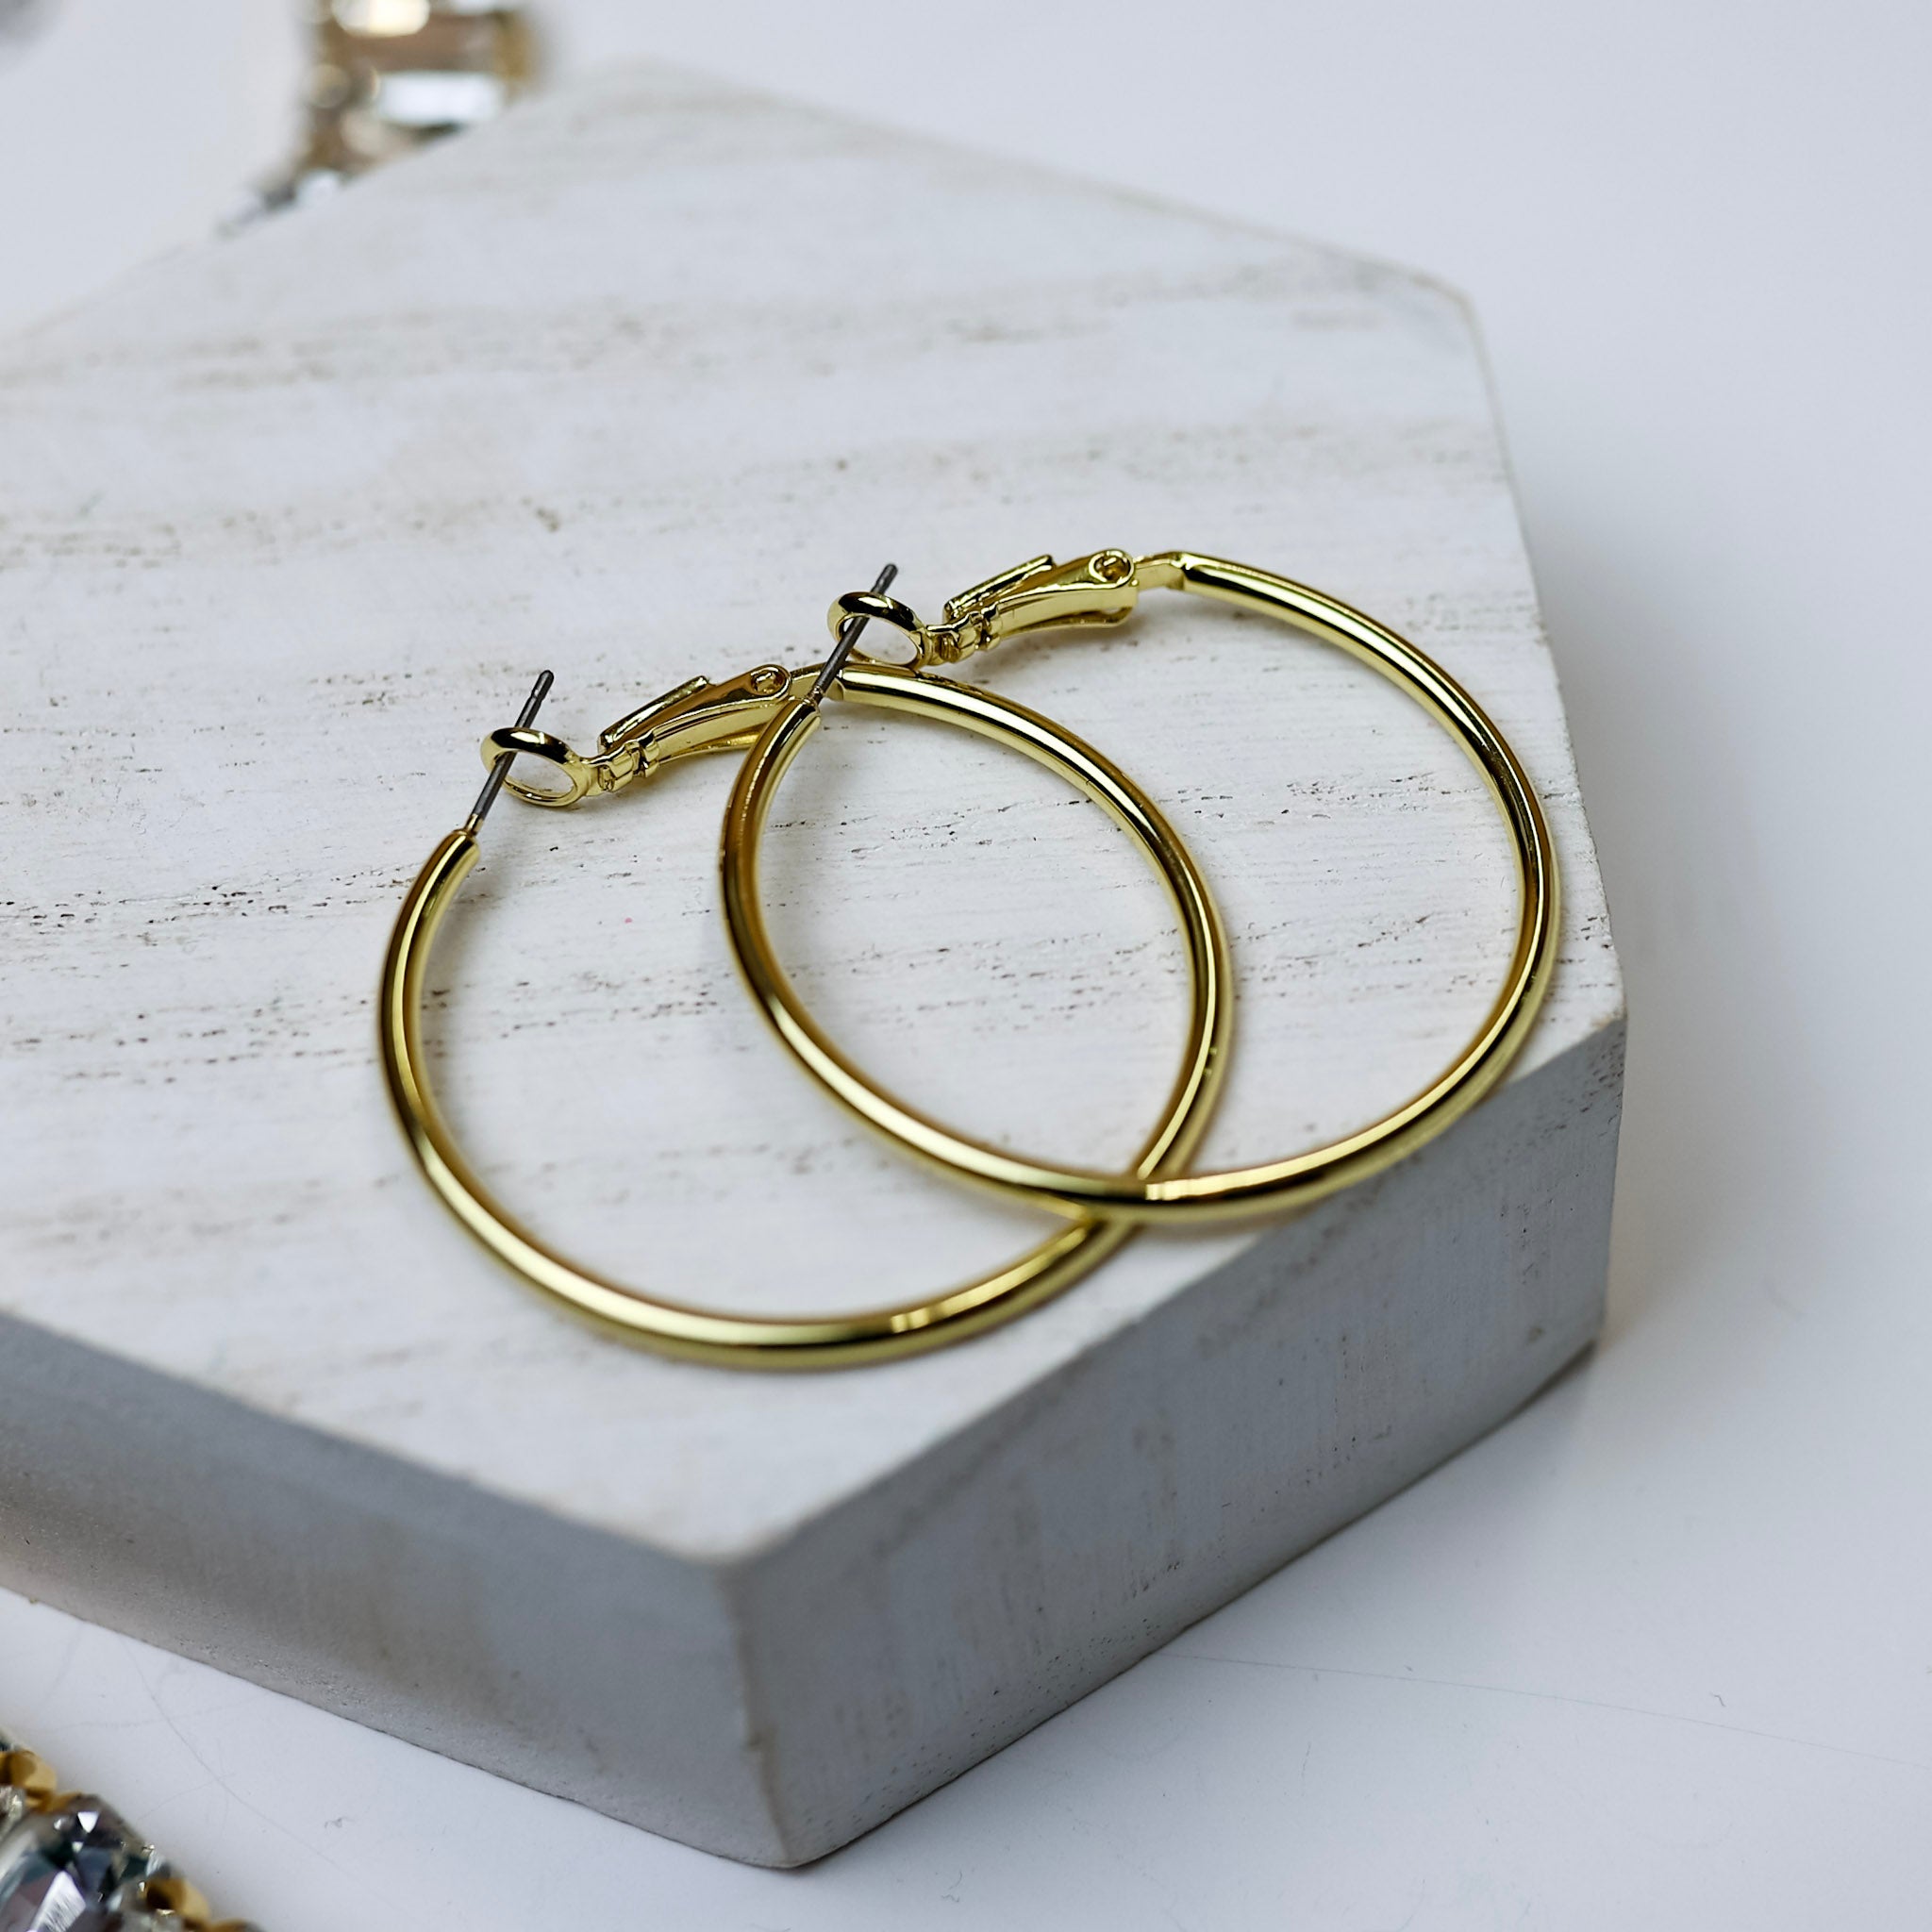 A pair of gold-tone circle hoop earrings pictured on a white background with crystal necklaces.